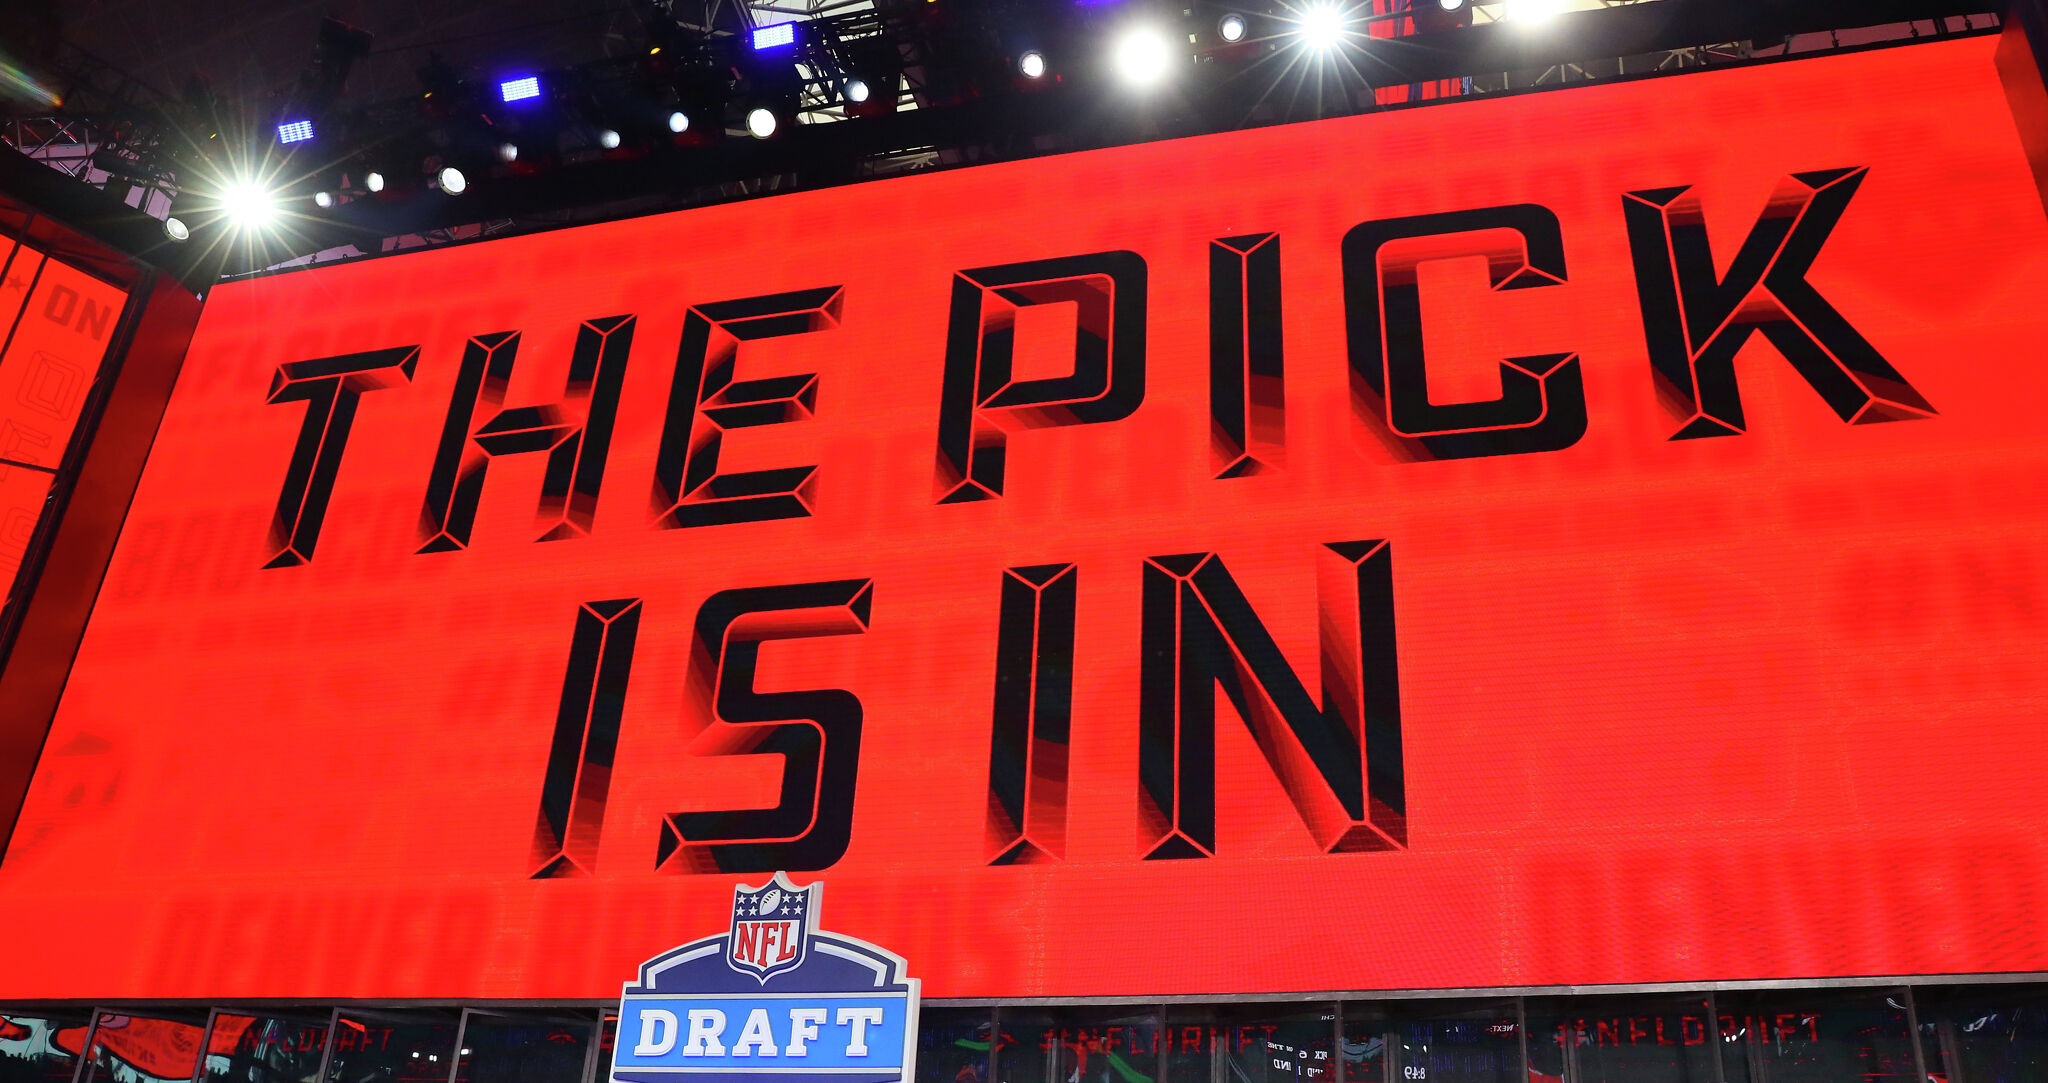 NFL draft: Texans get No. 2 and No. 12 picks in first round